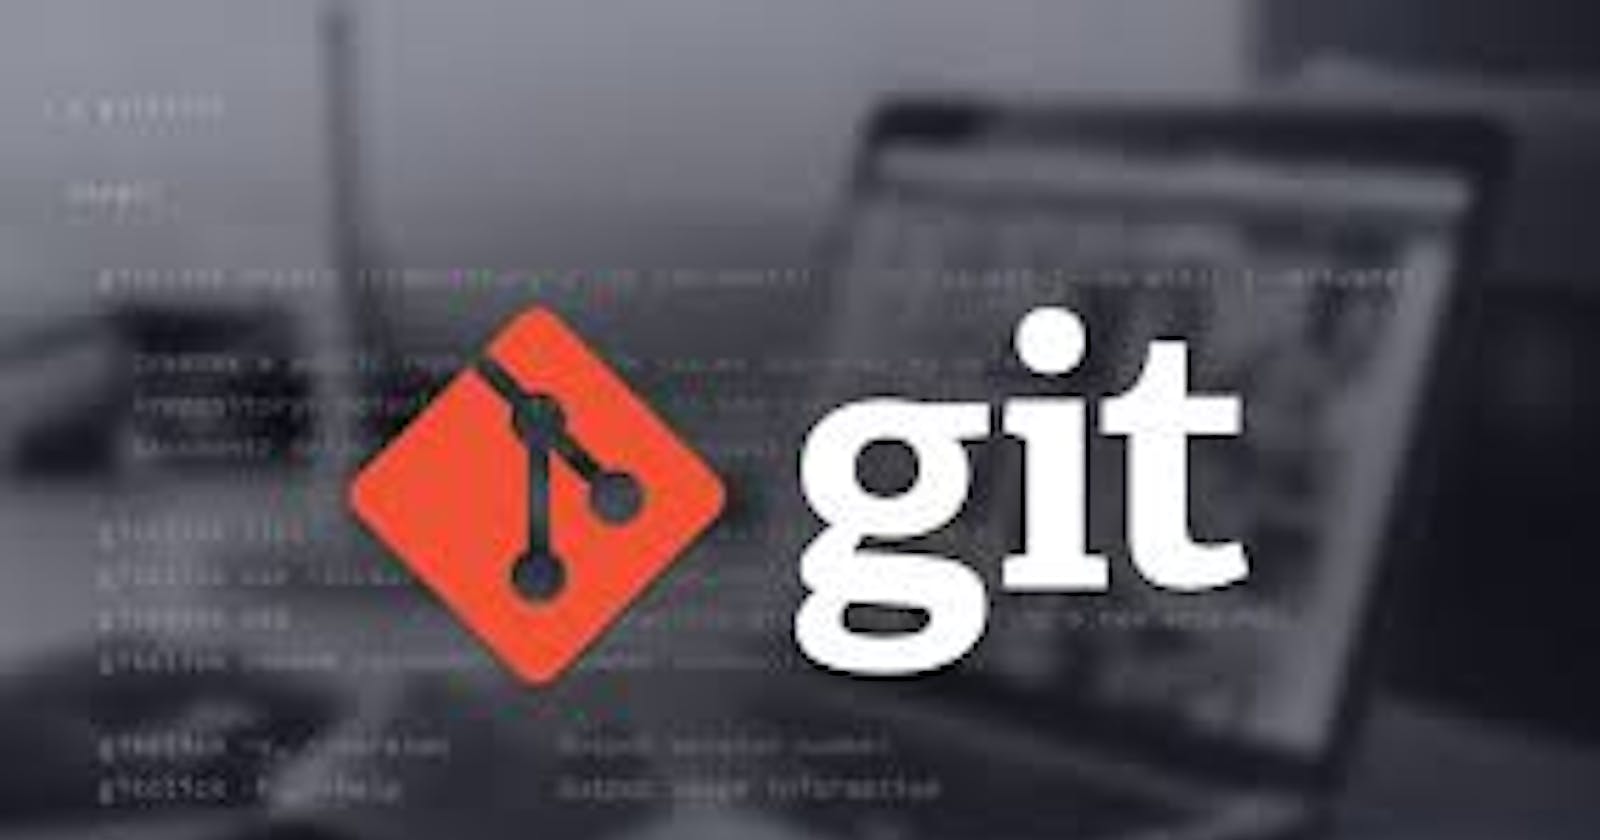 Introduction Of Git